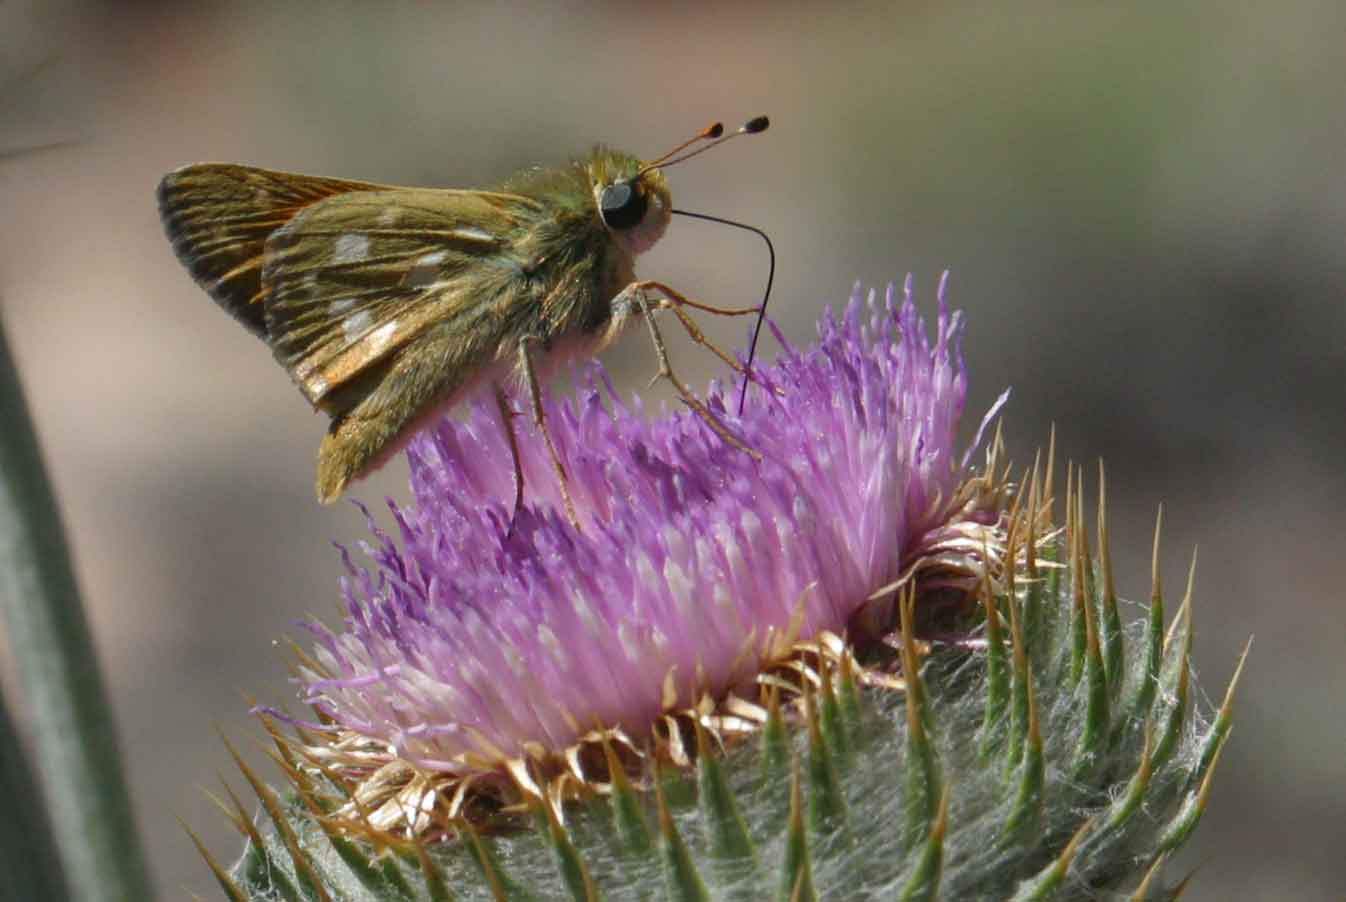 Common Branded Skipper Butterfly (Hesperia comma) on Western Thistle (Cirsium occidentale)